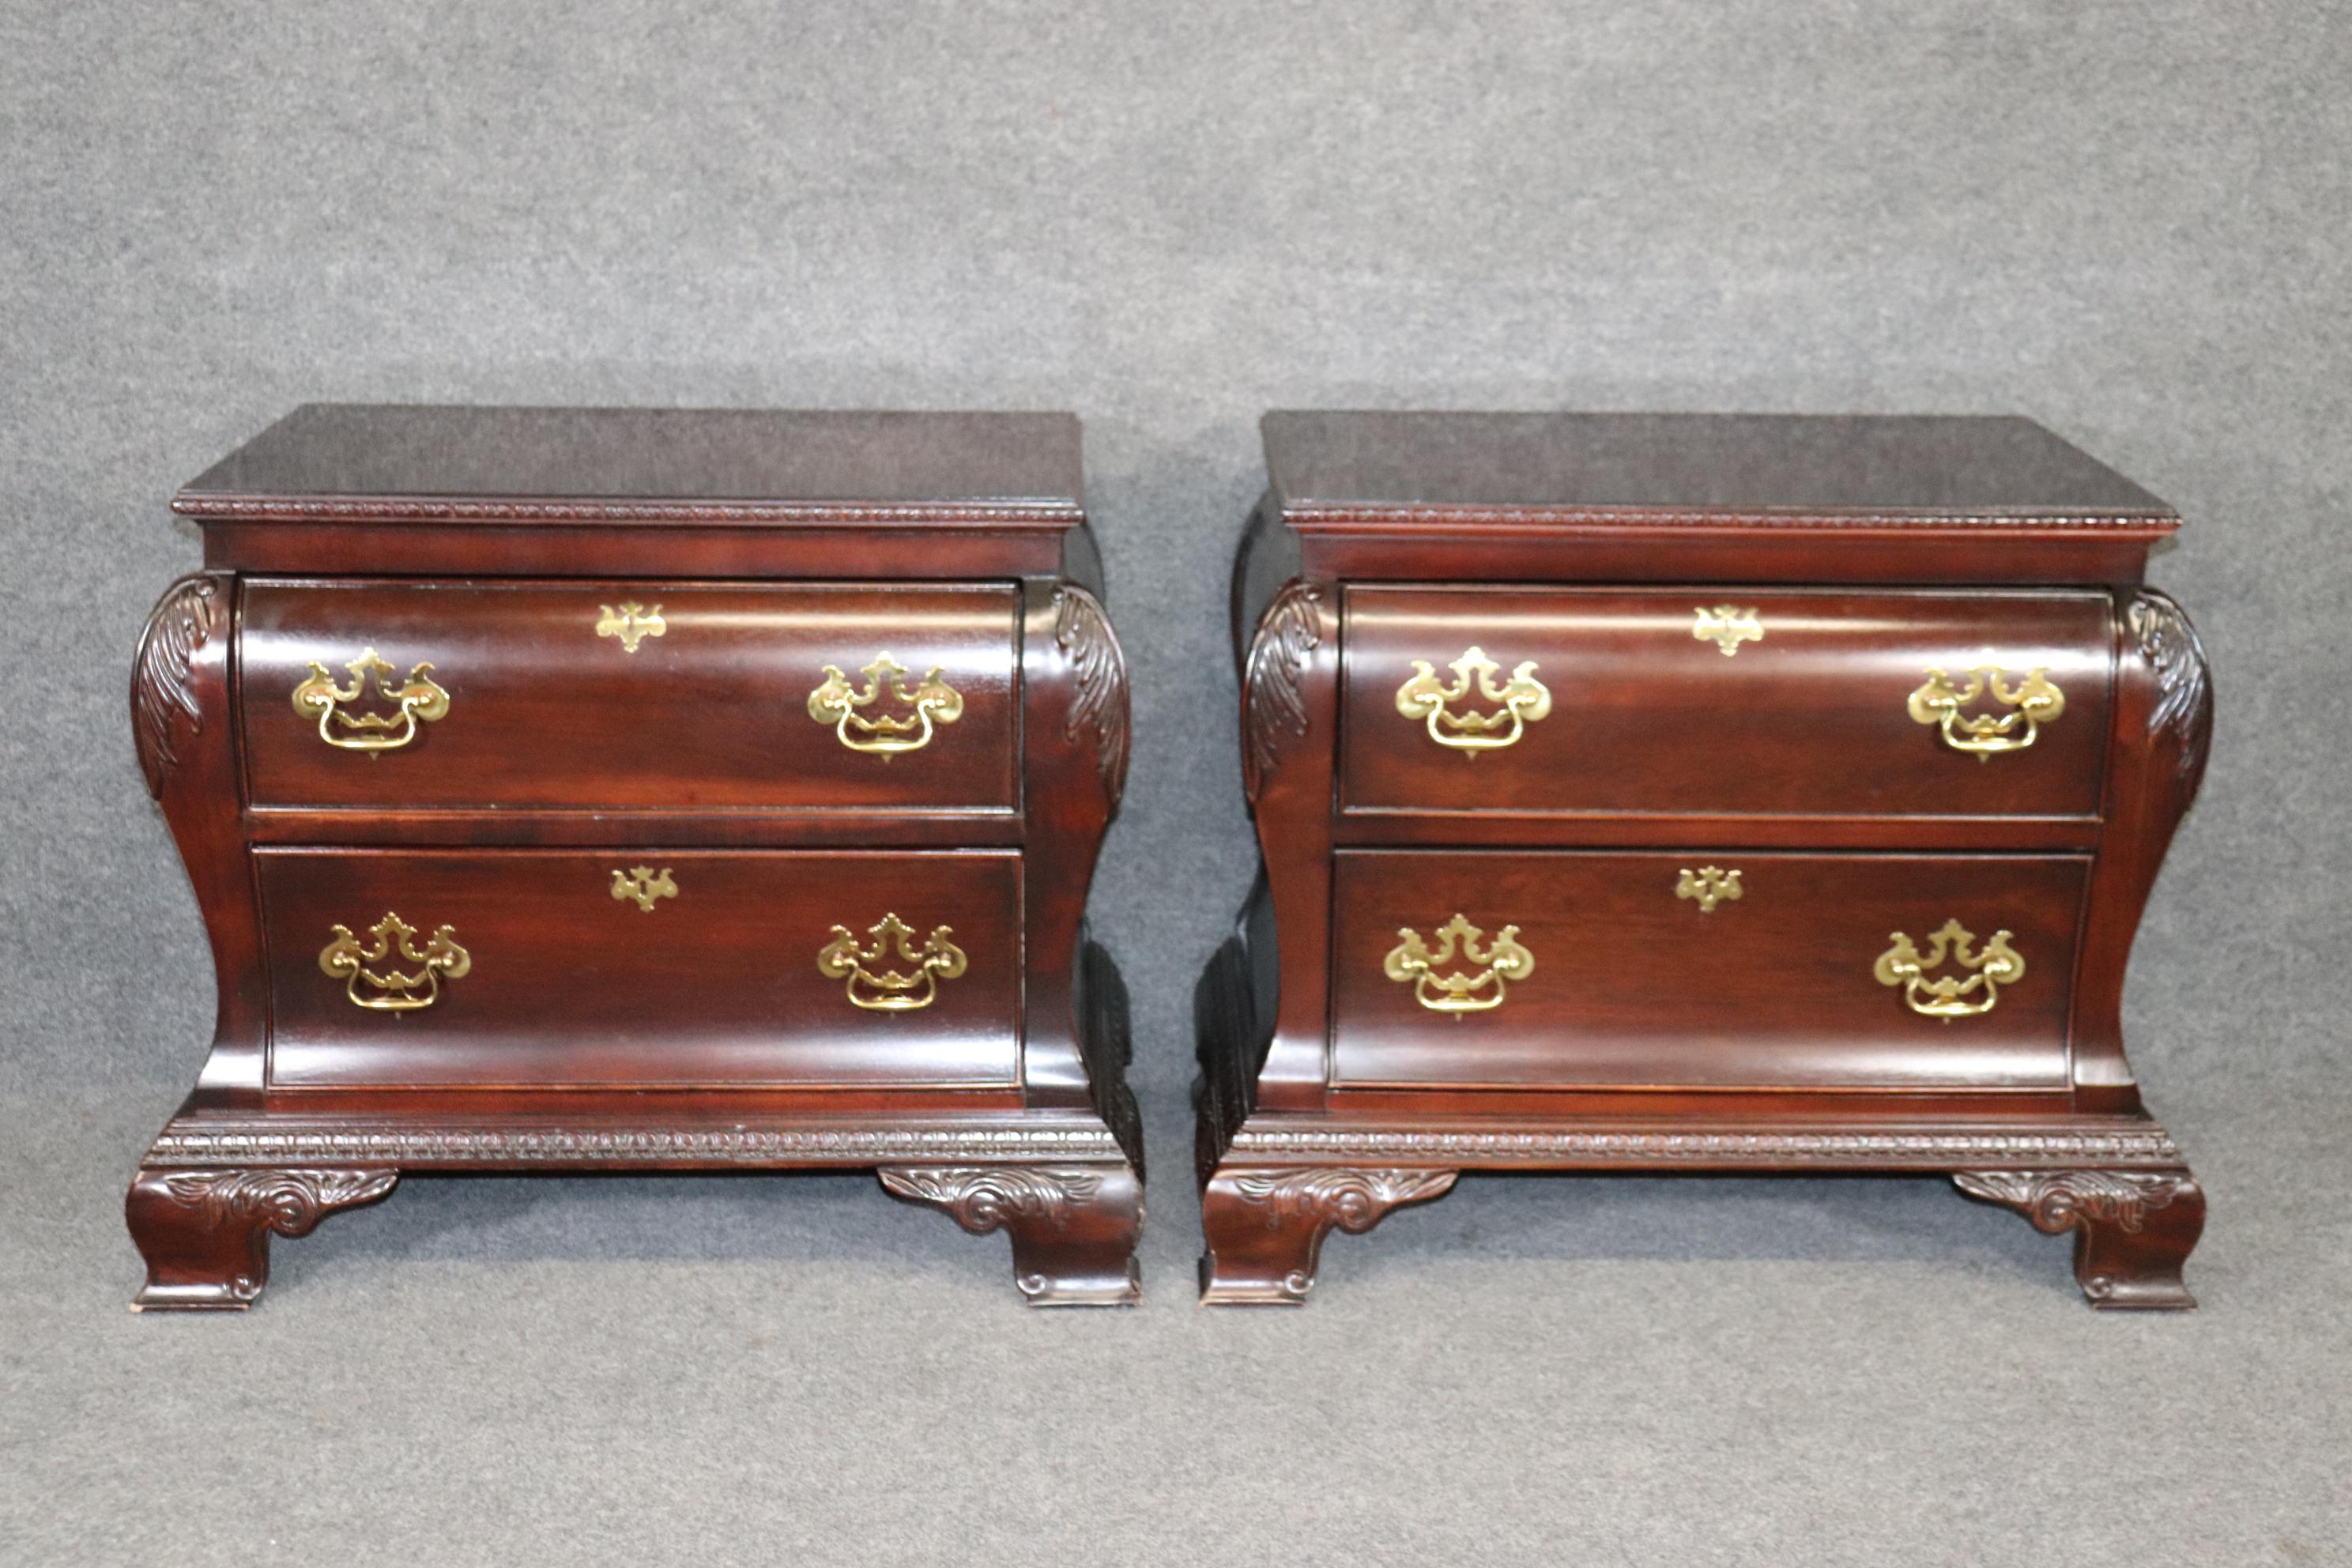 This is a pair of Chippendale rococo style mahogany nightstands by Century furniture. They are in good used condition with some signs of use including scratches and a cup ring. The stands measure 27 inches tall x 33 wide x 20 deep. They will be